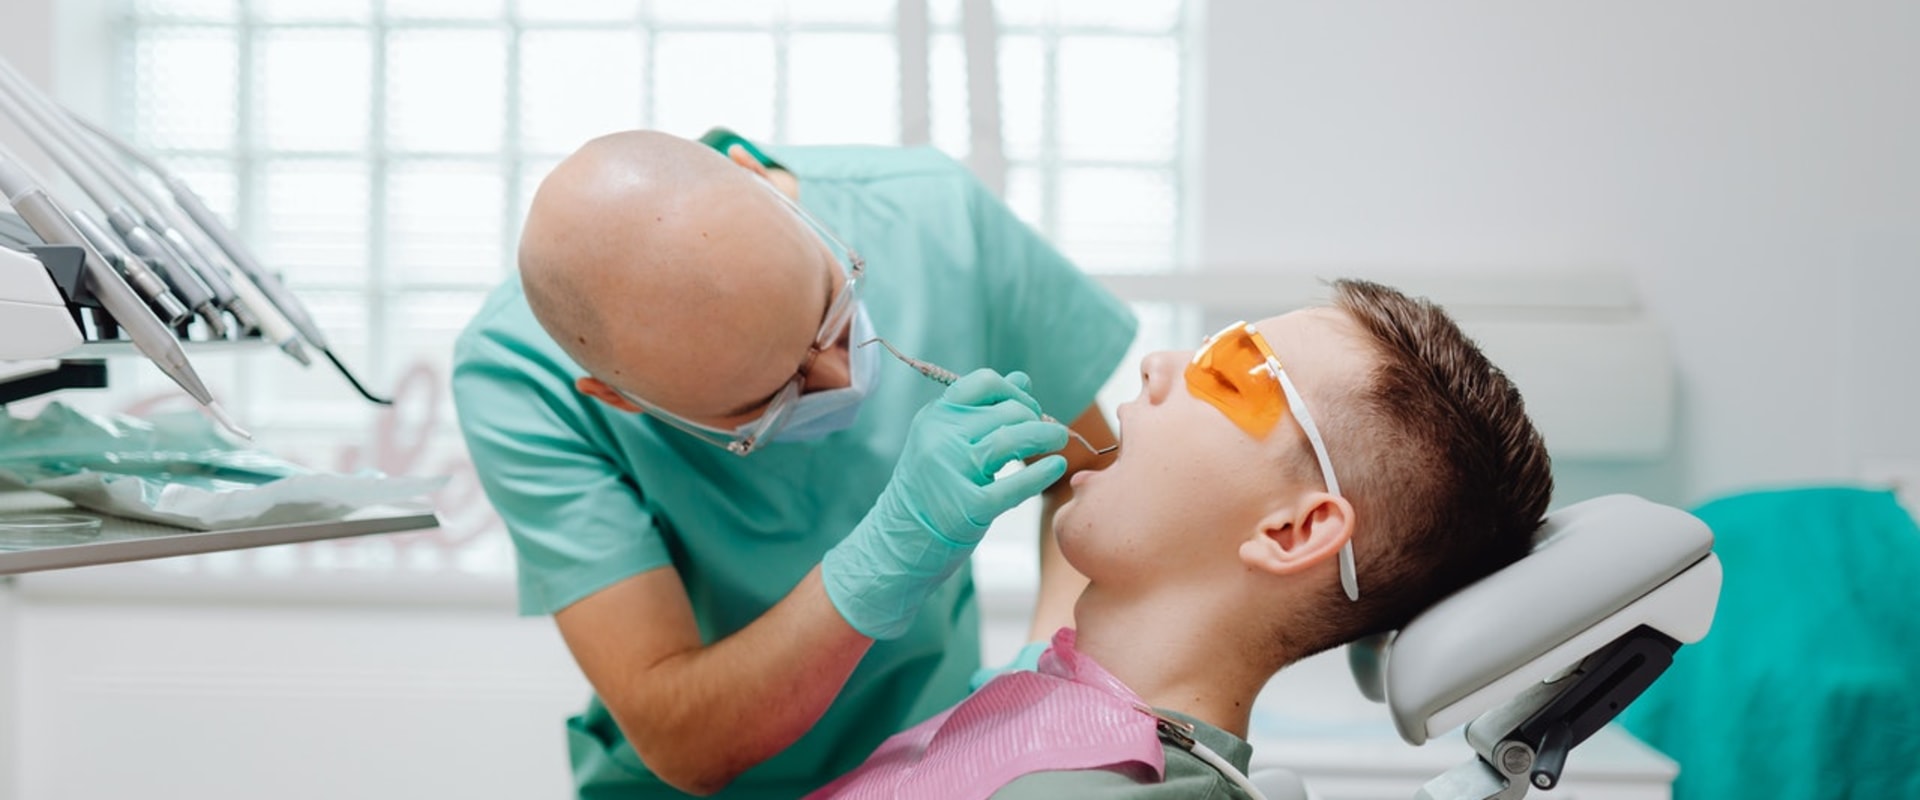 Faster Healing And Reduced Pain With Laser Dentistry In Austin: A Revolutionary Approach To Dental Procedures